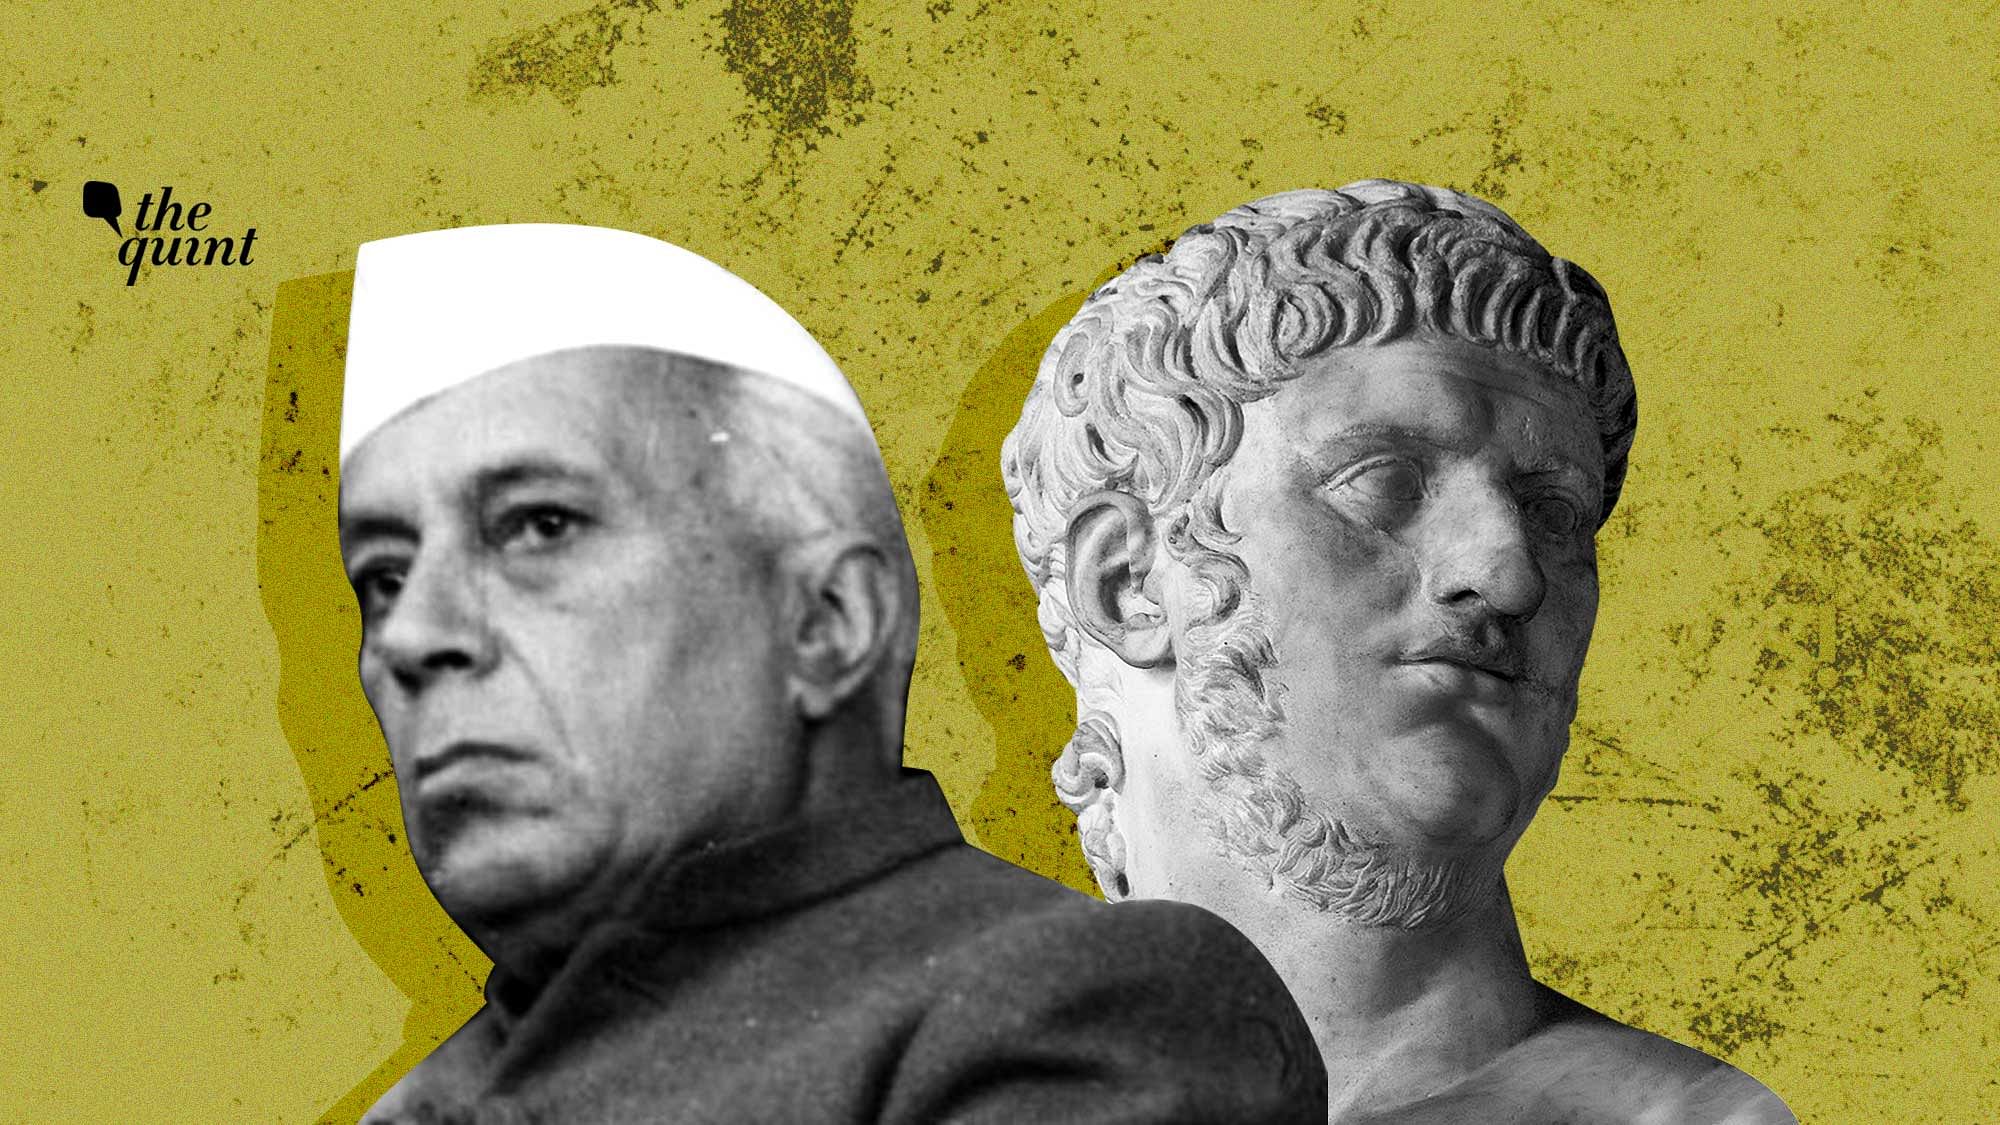 Image of Pt Nehru (L) and the Bust of Nero (the Roman emperor) used for representational purposes.